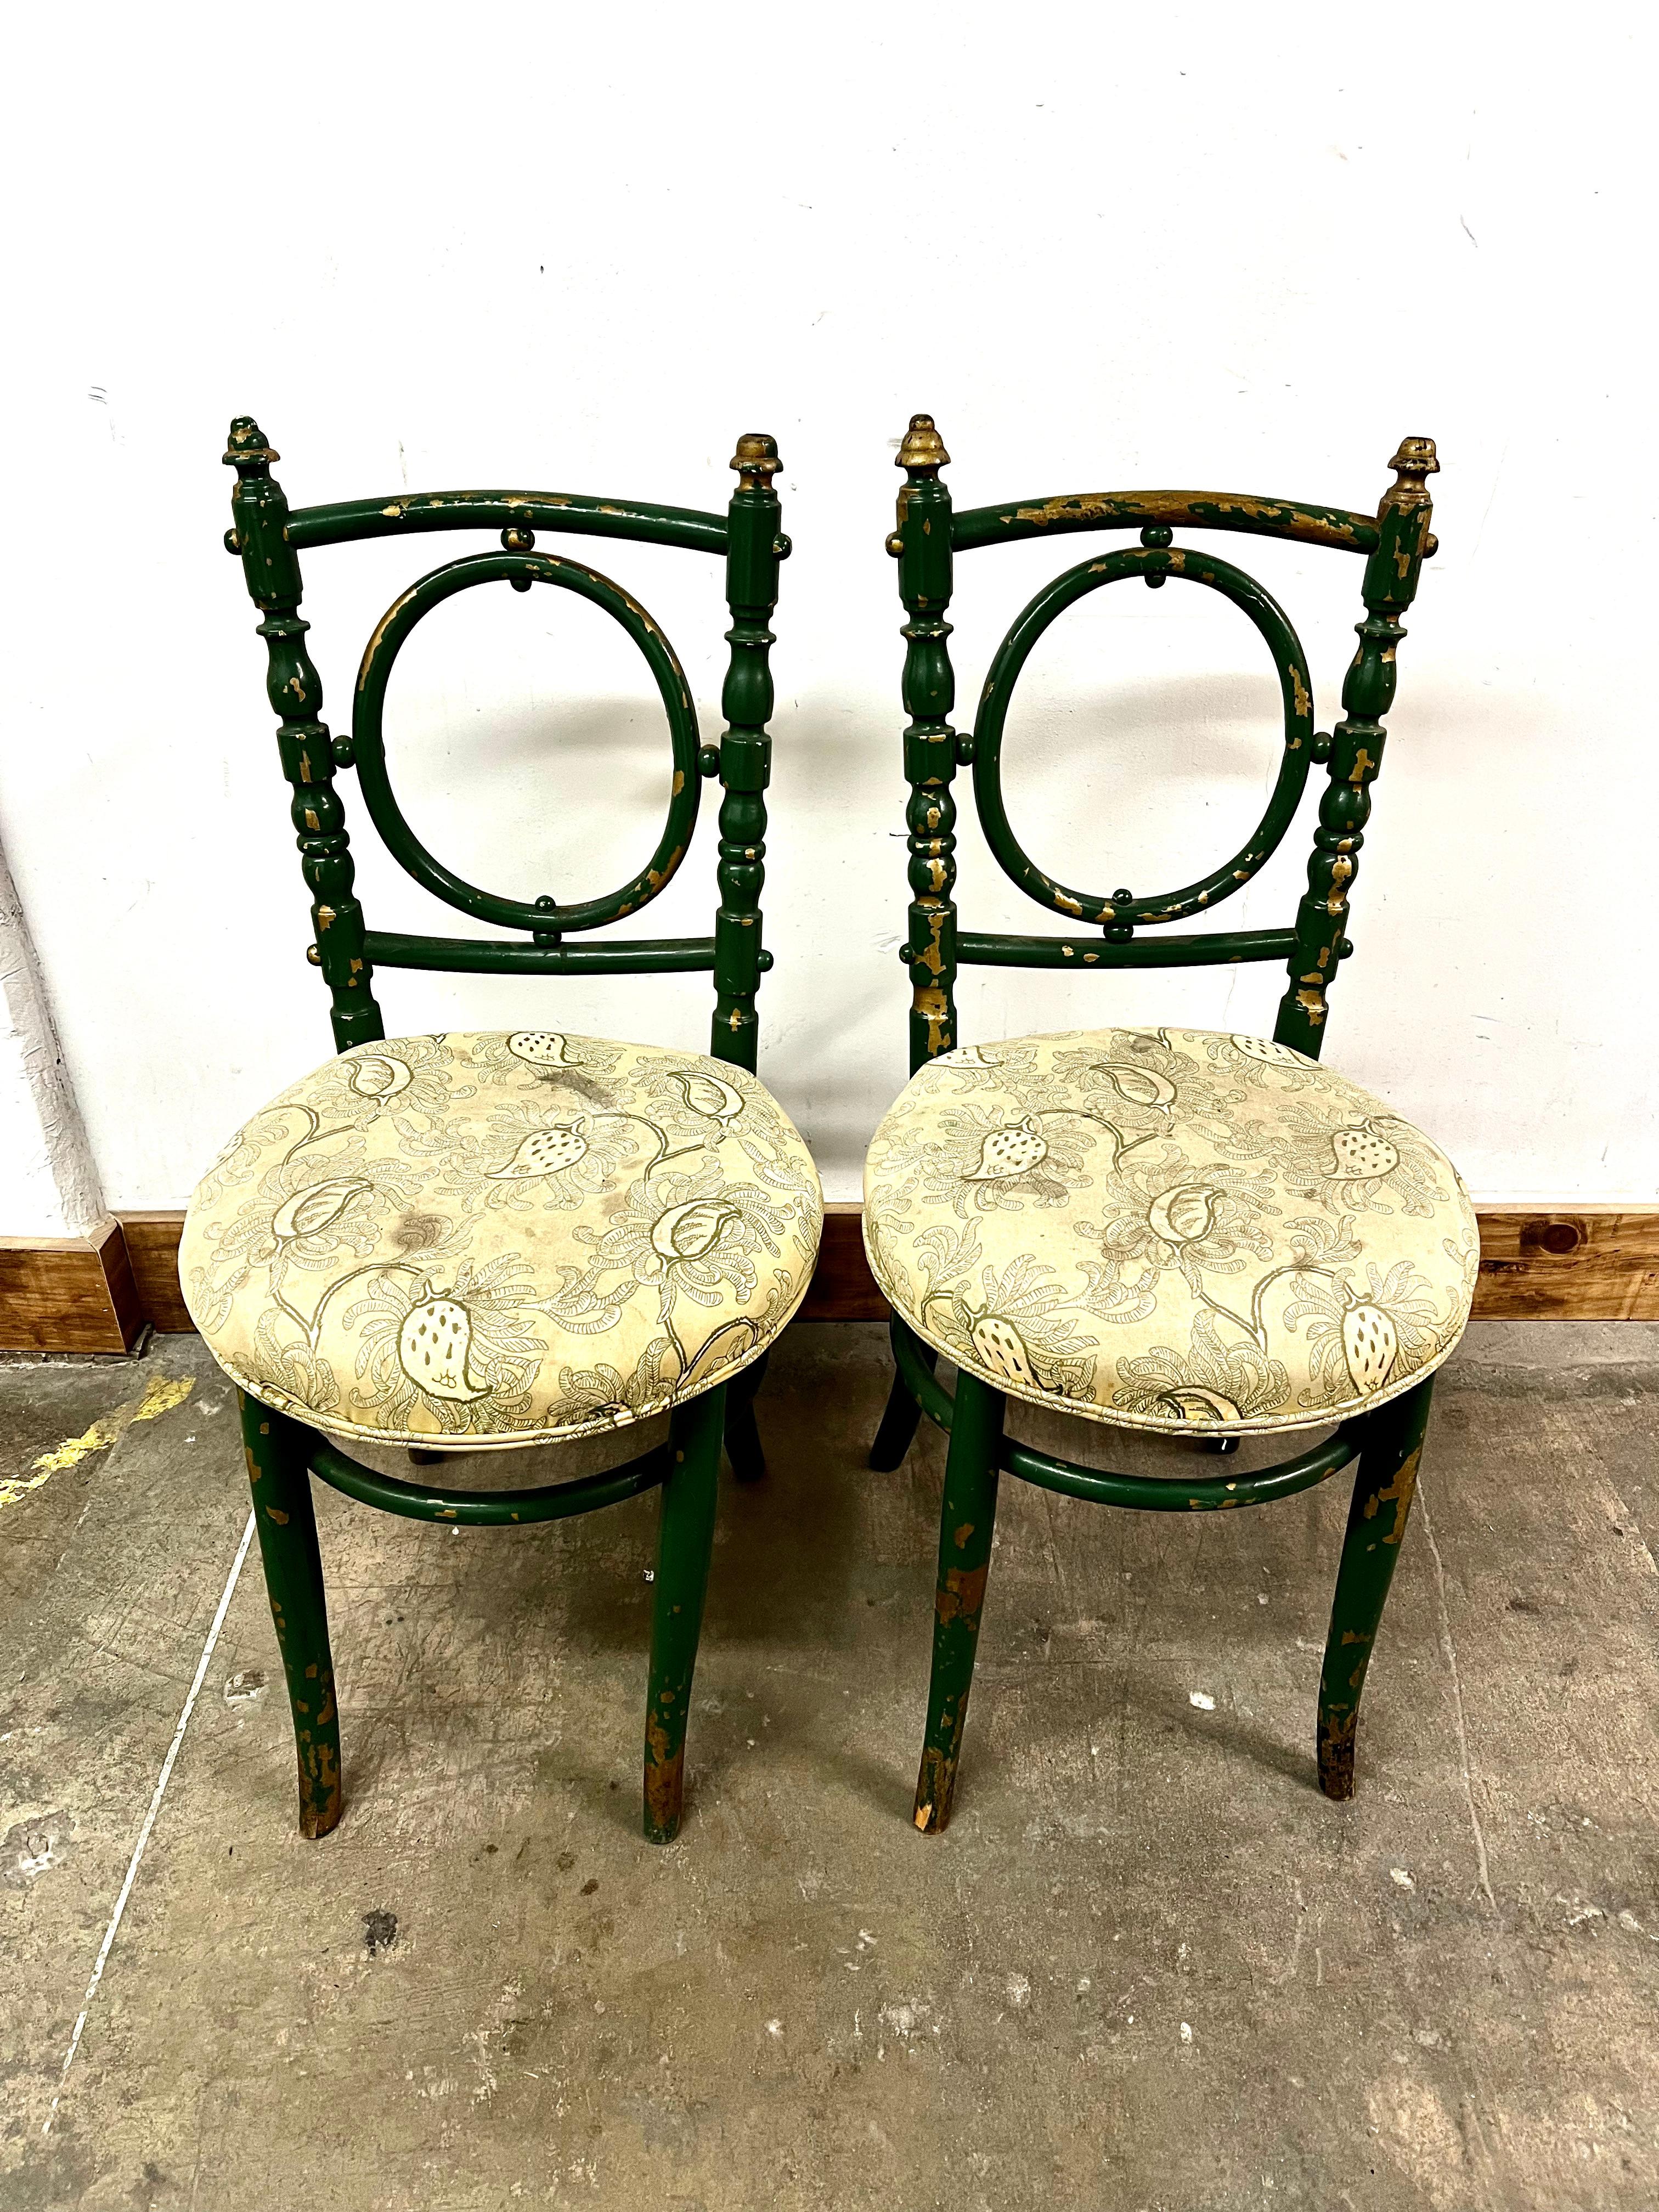 19th Century Green and Gold Bentwood Chairs with Heavy Patination For Sale 2